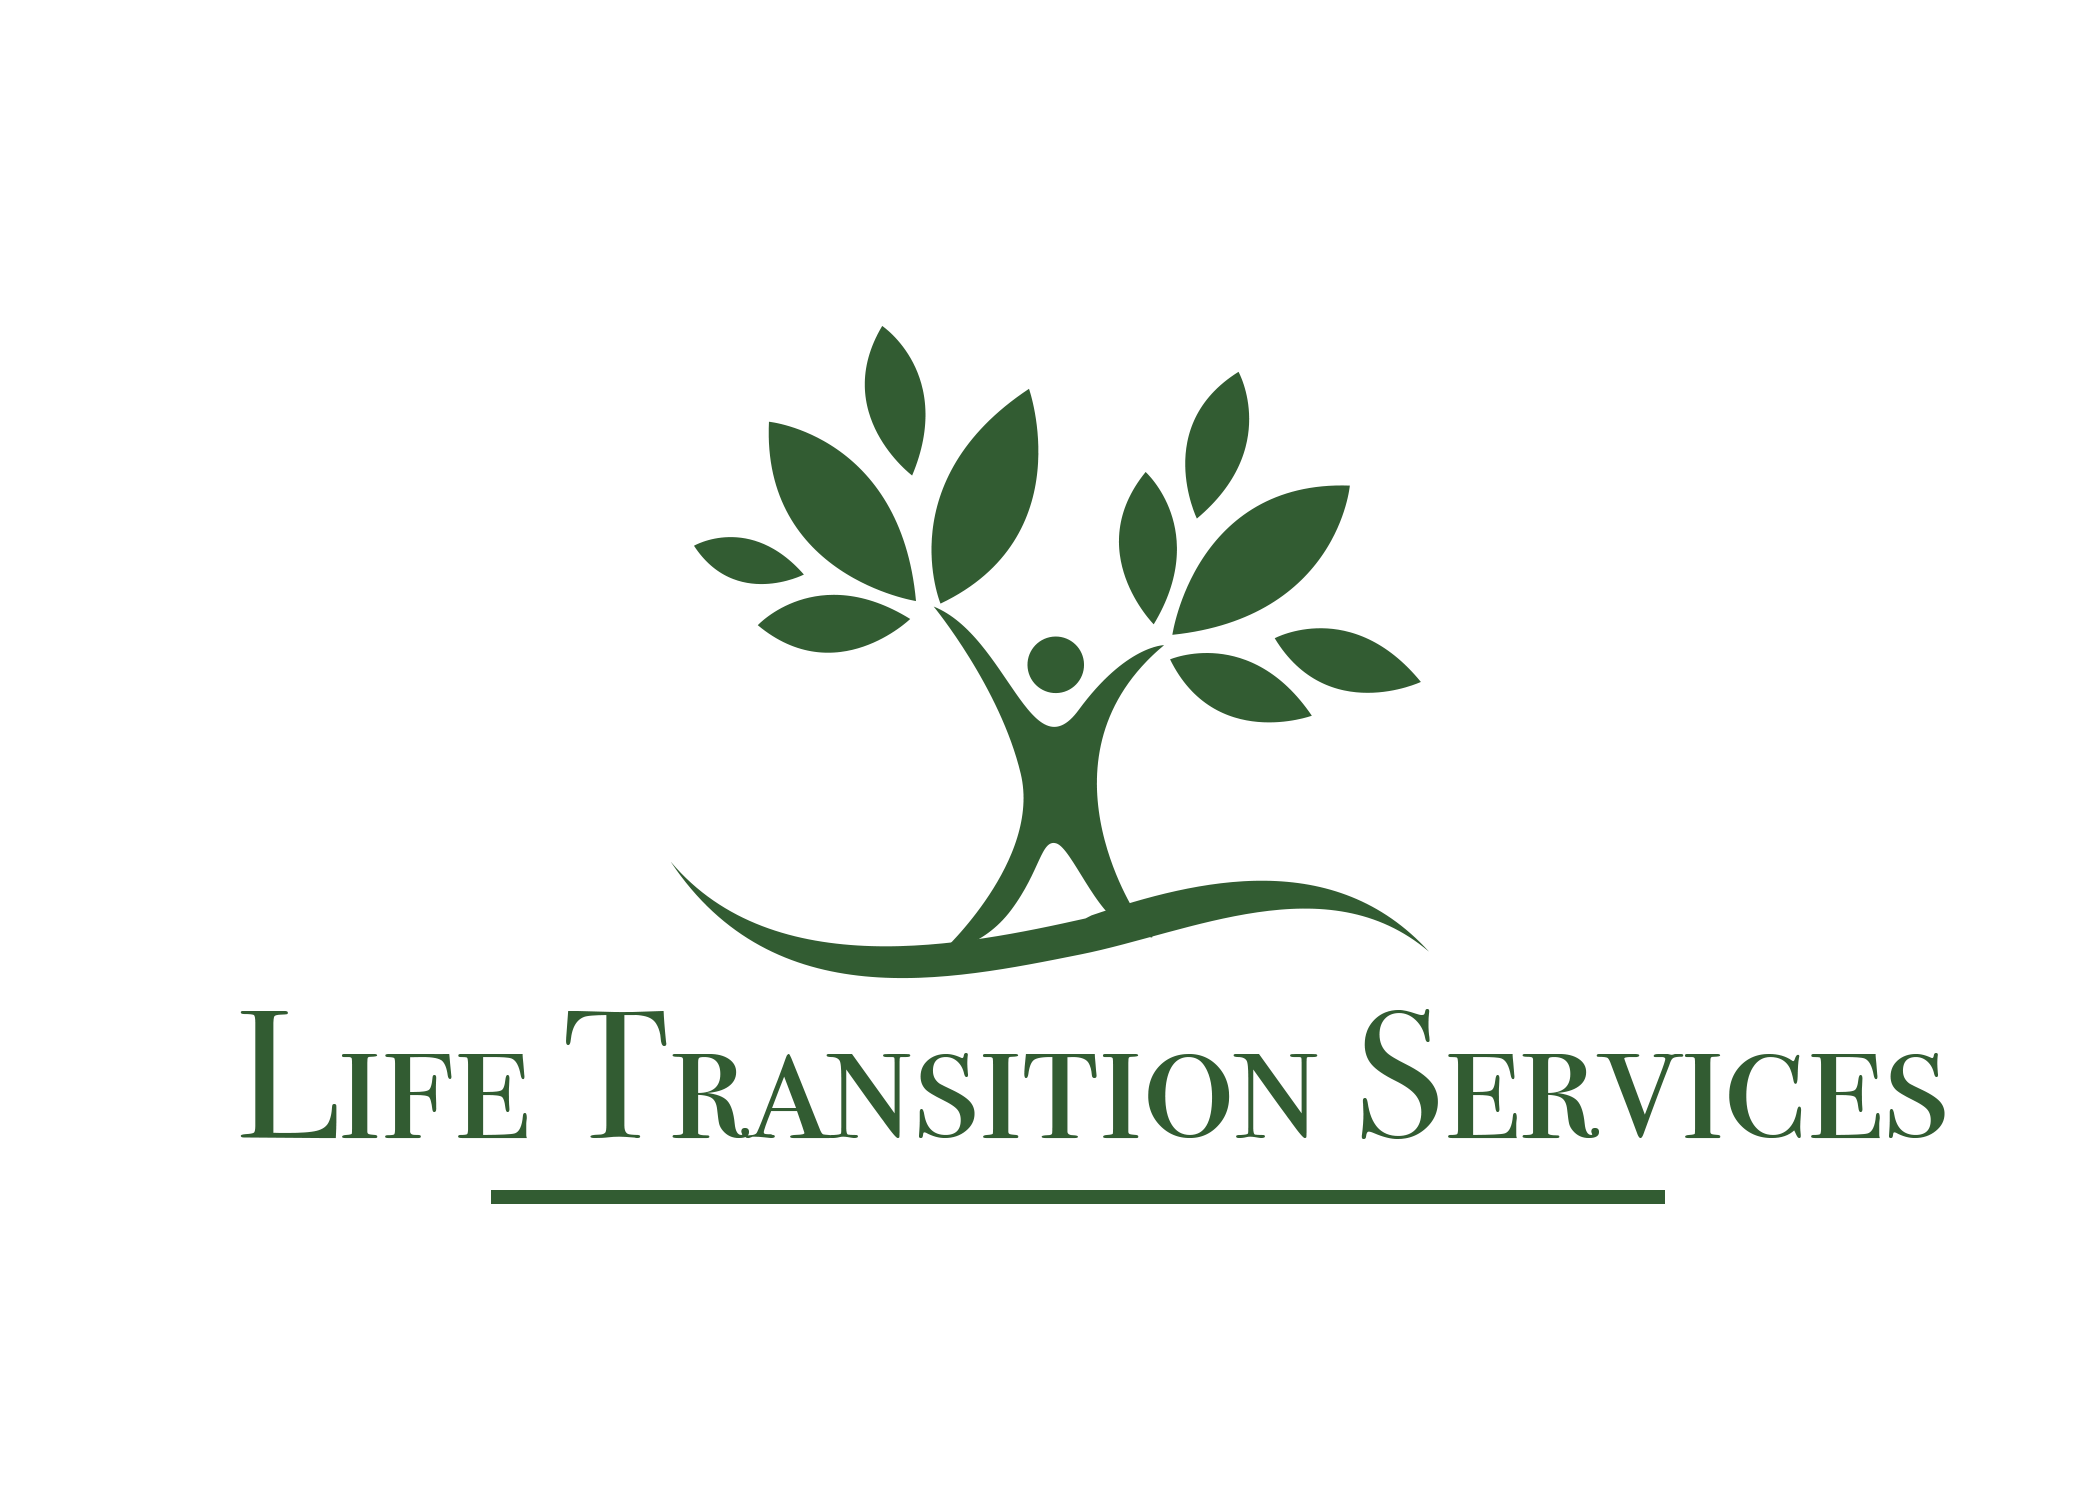 Life Transition Services 